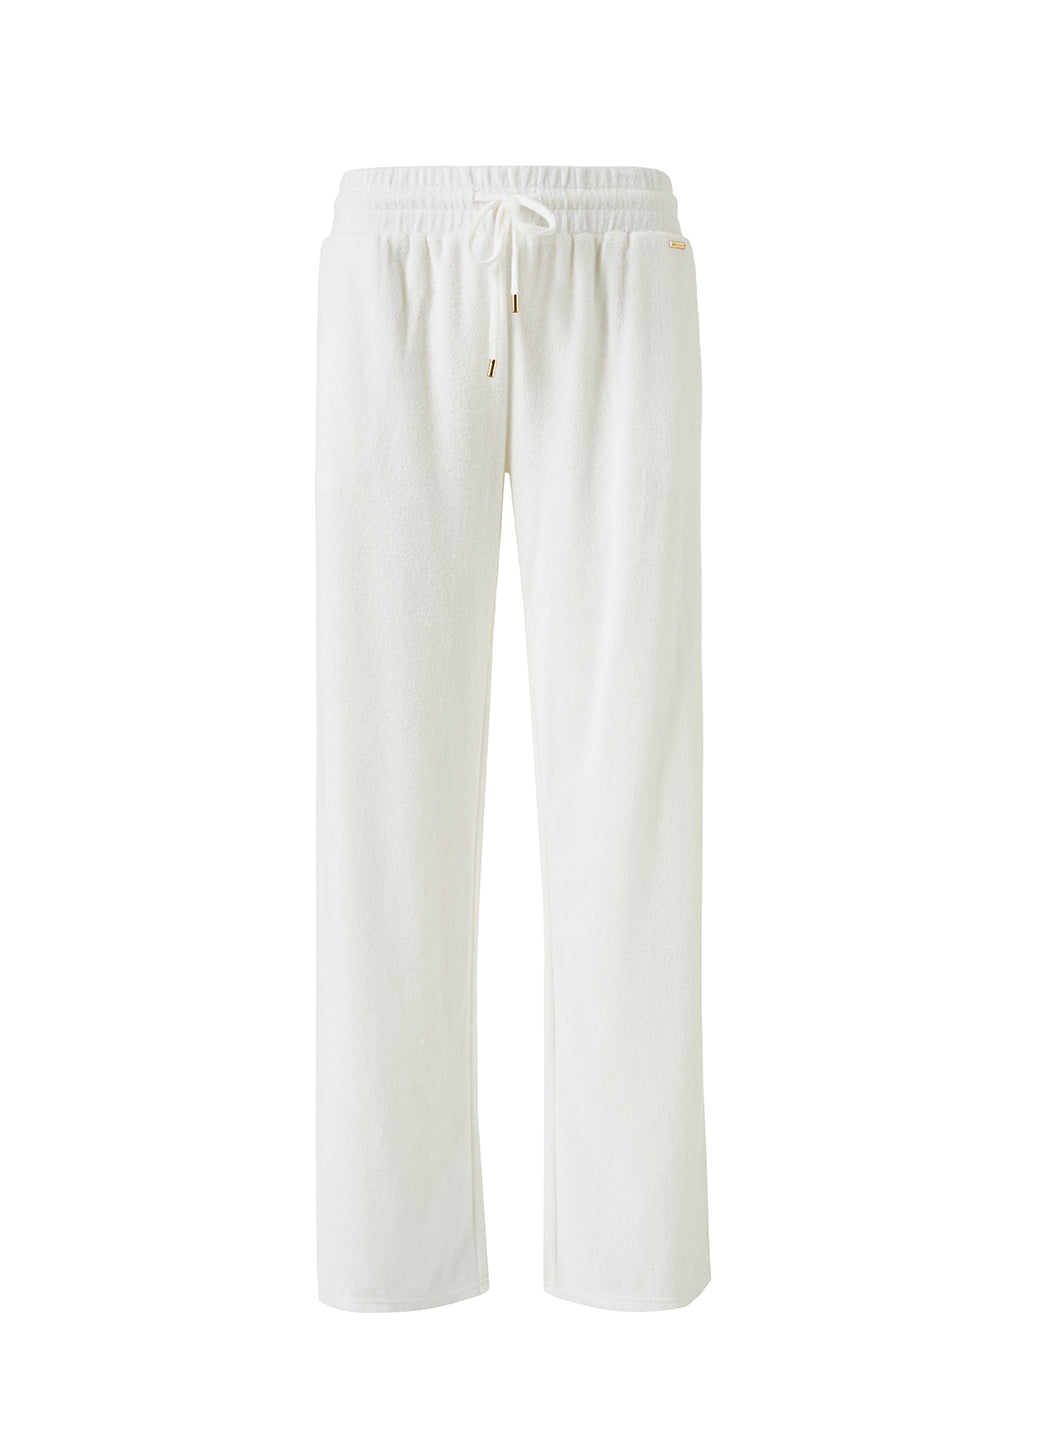 Melissa Odabash Betty White Terry Relaxed Trousers